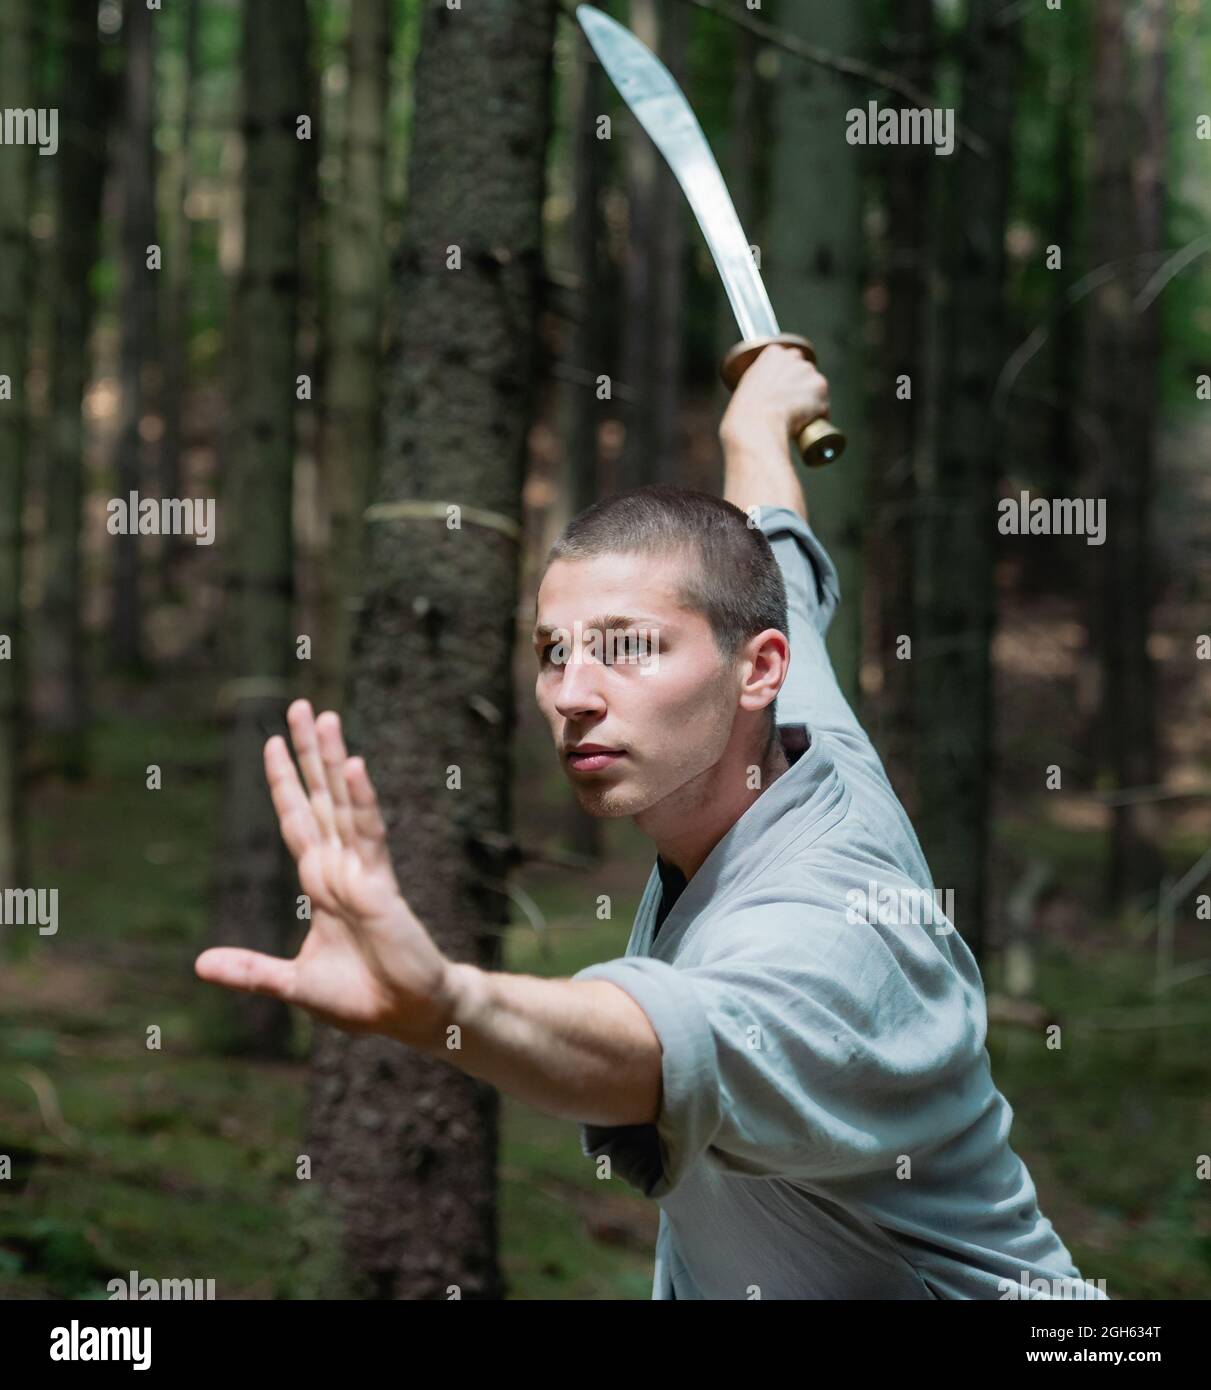 man in traditional clothes practicing sword stance during kung fu training in forest Stock Photo